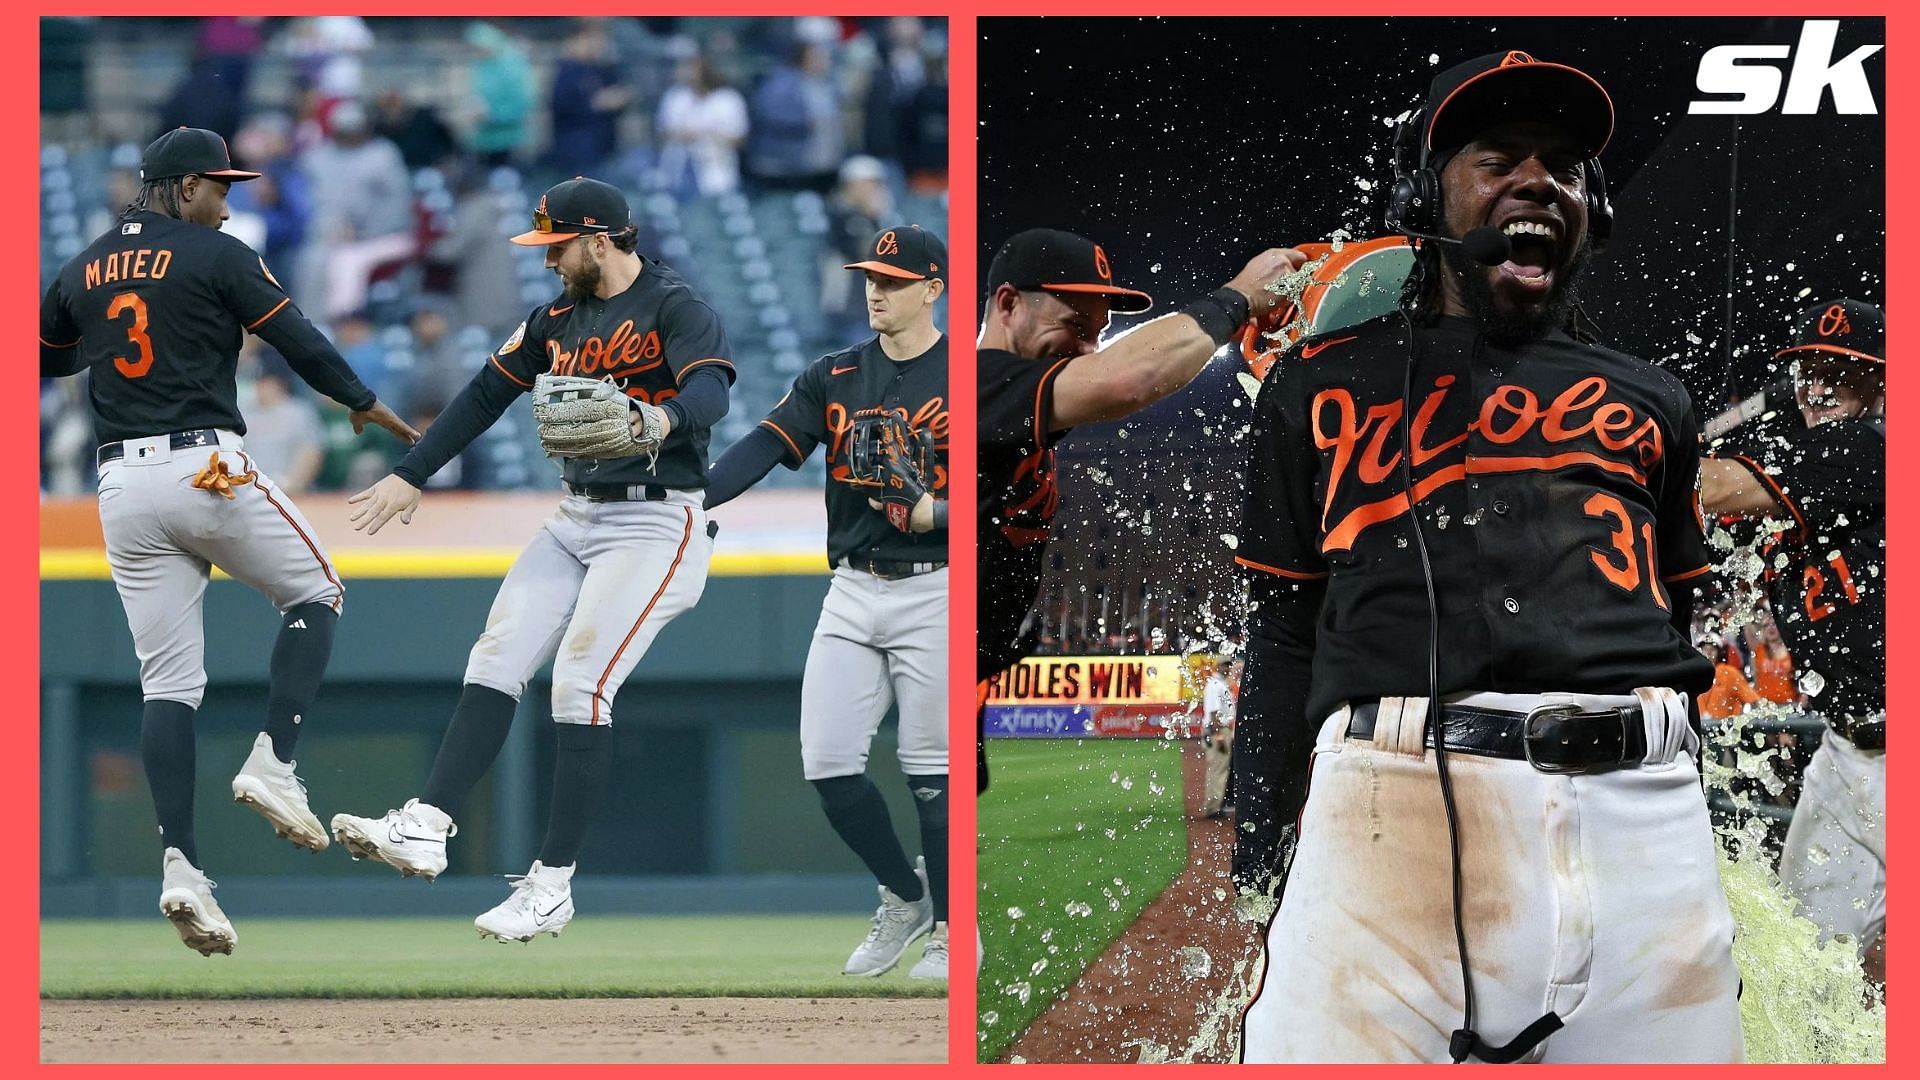 The Baltimore Orioles have the best record in the American League East